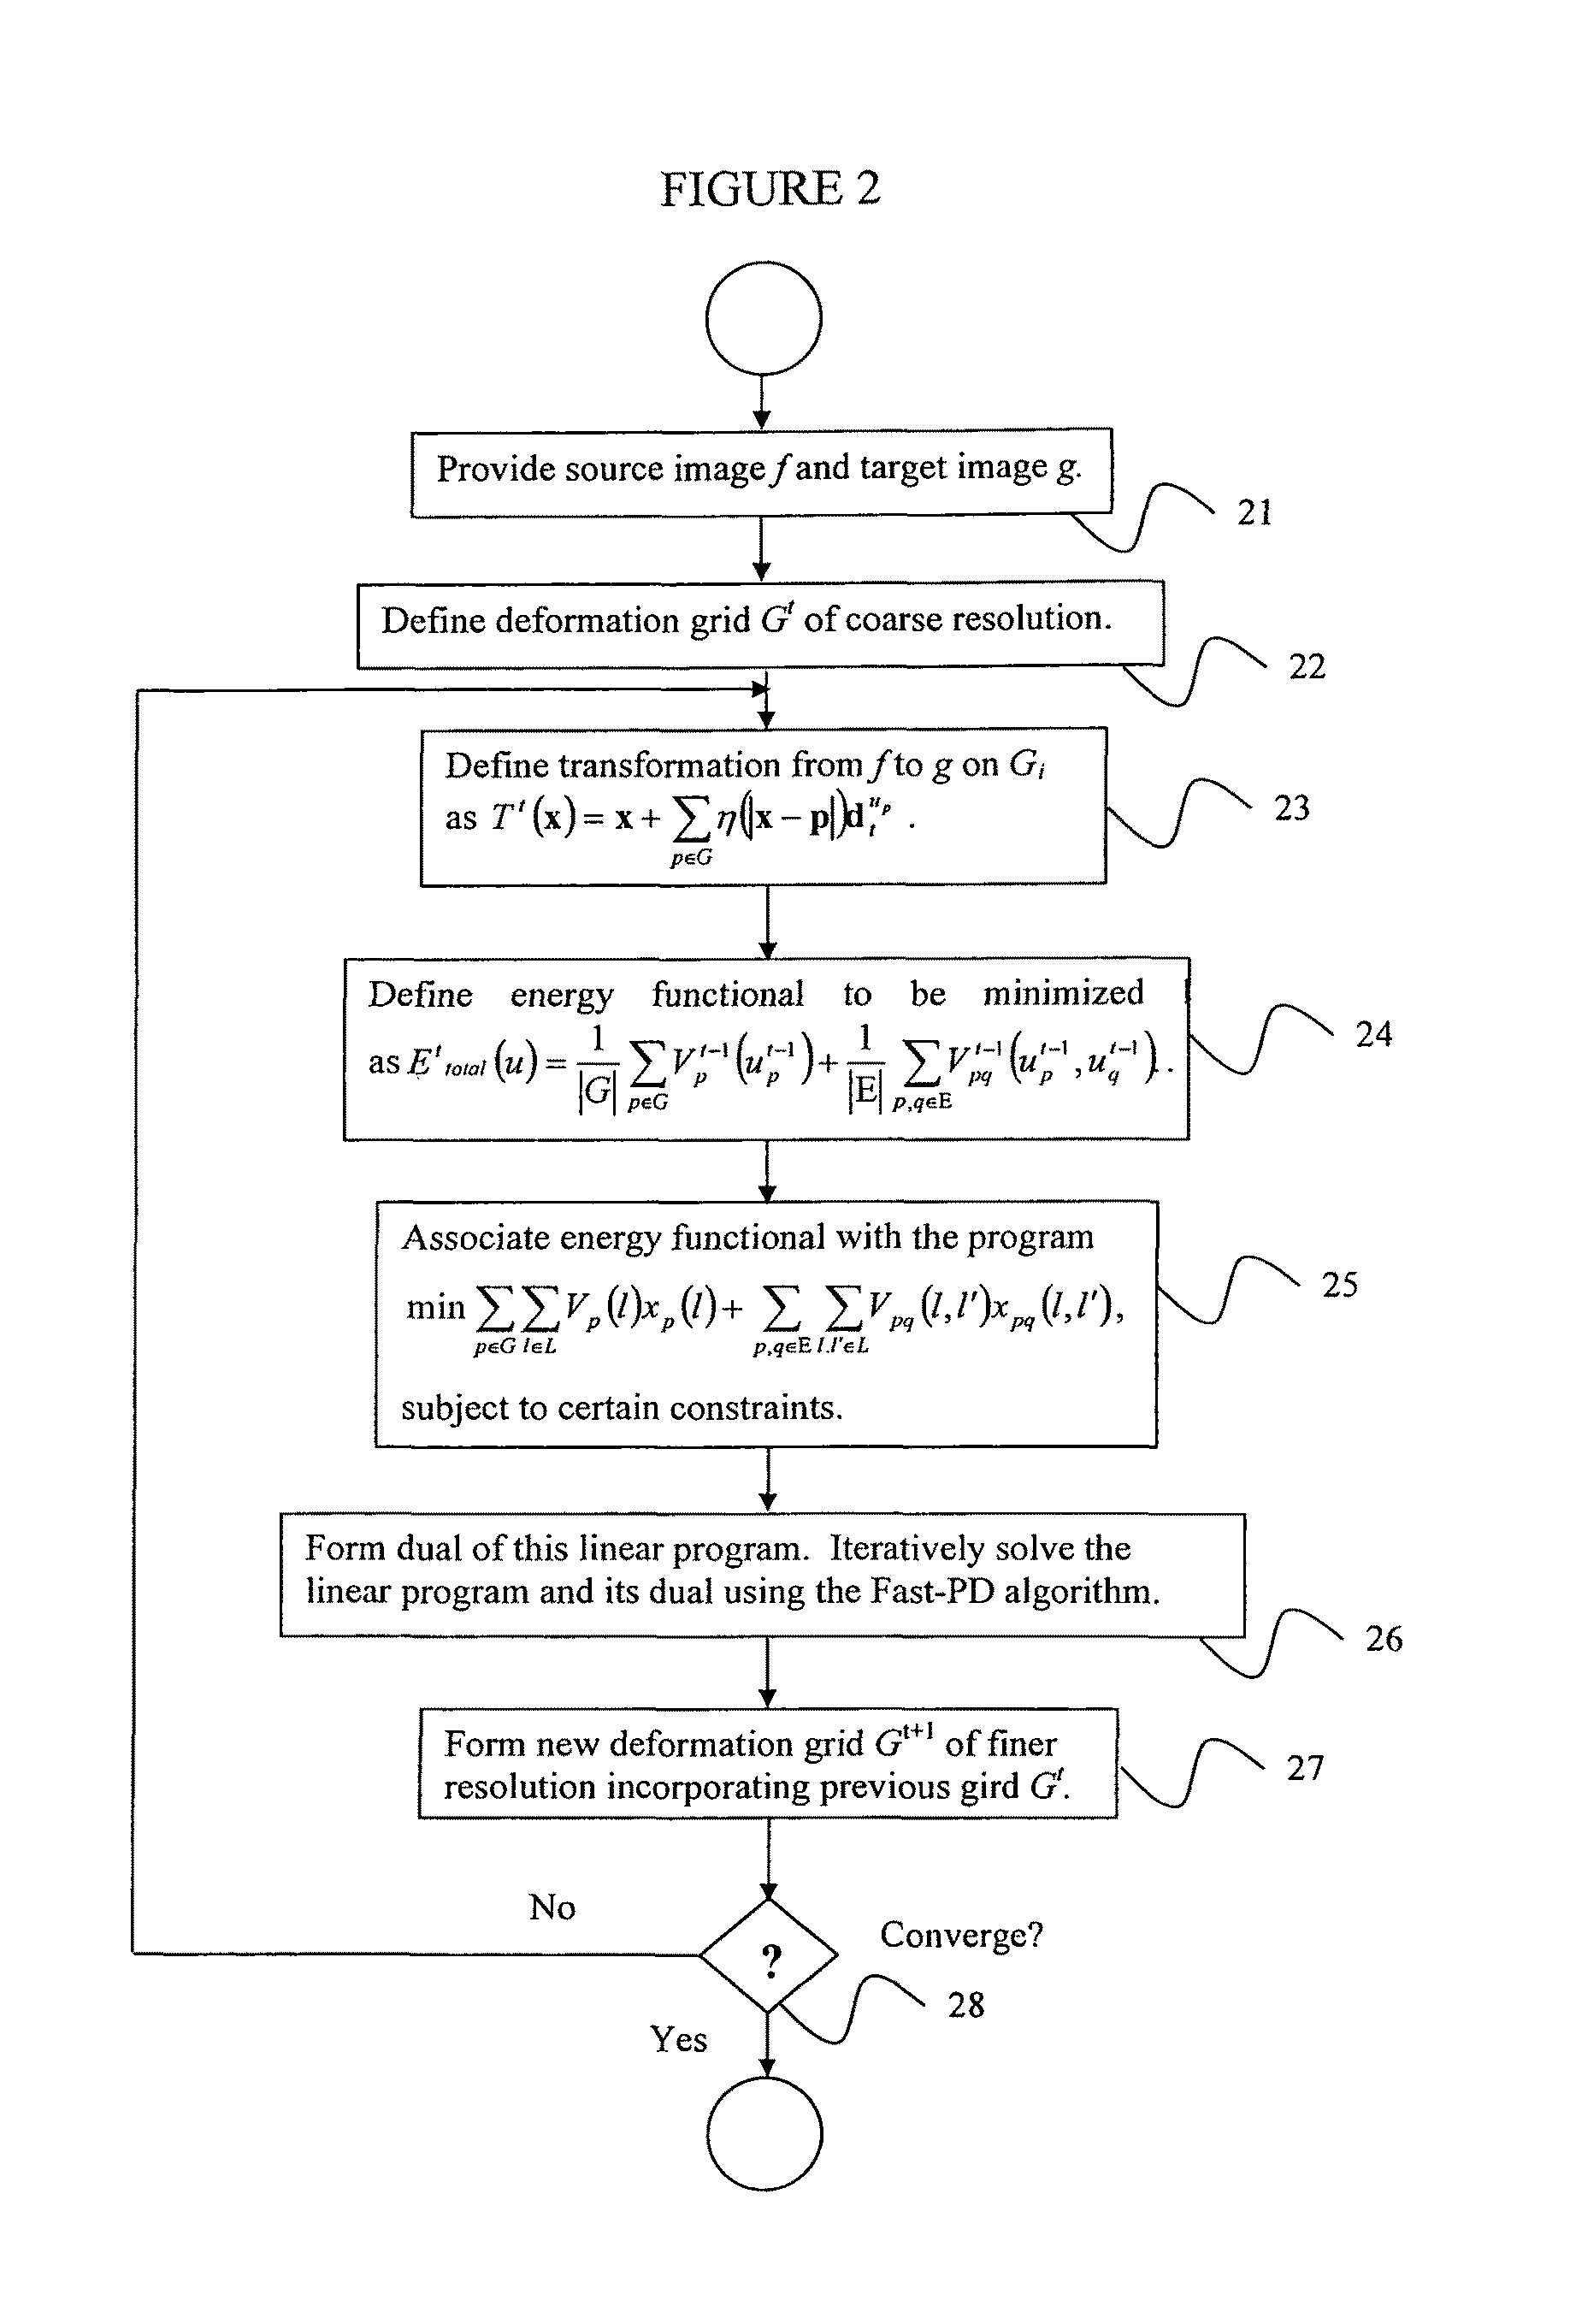 System and method for dense image registration using Markov Random Fields and efficient linear programming